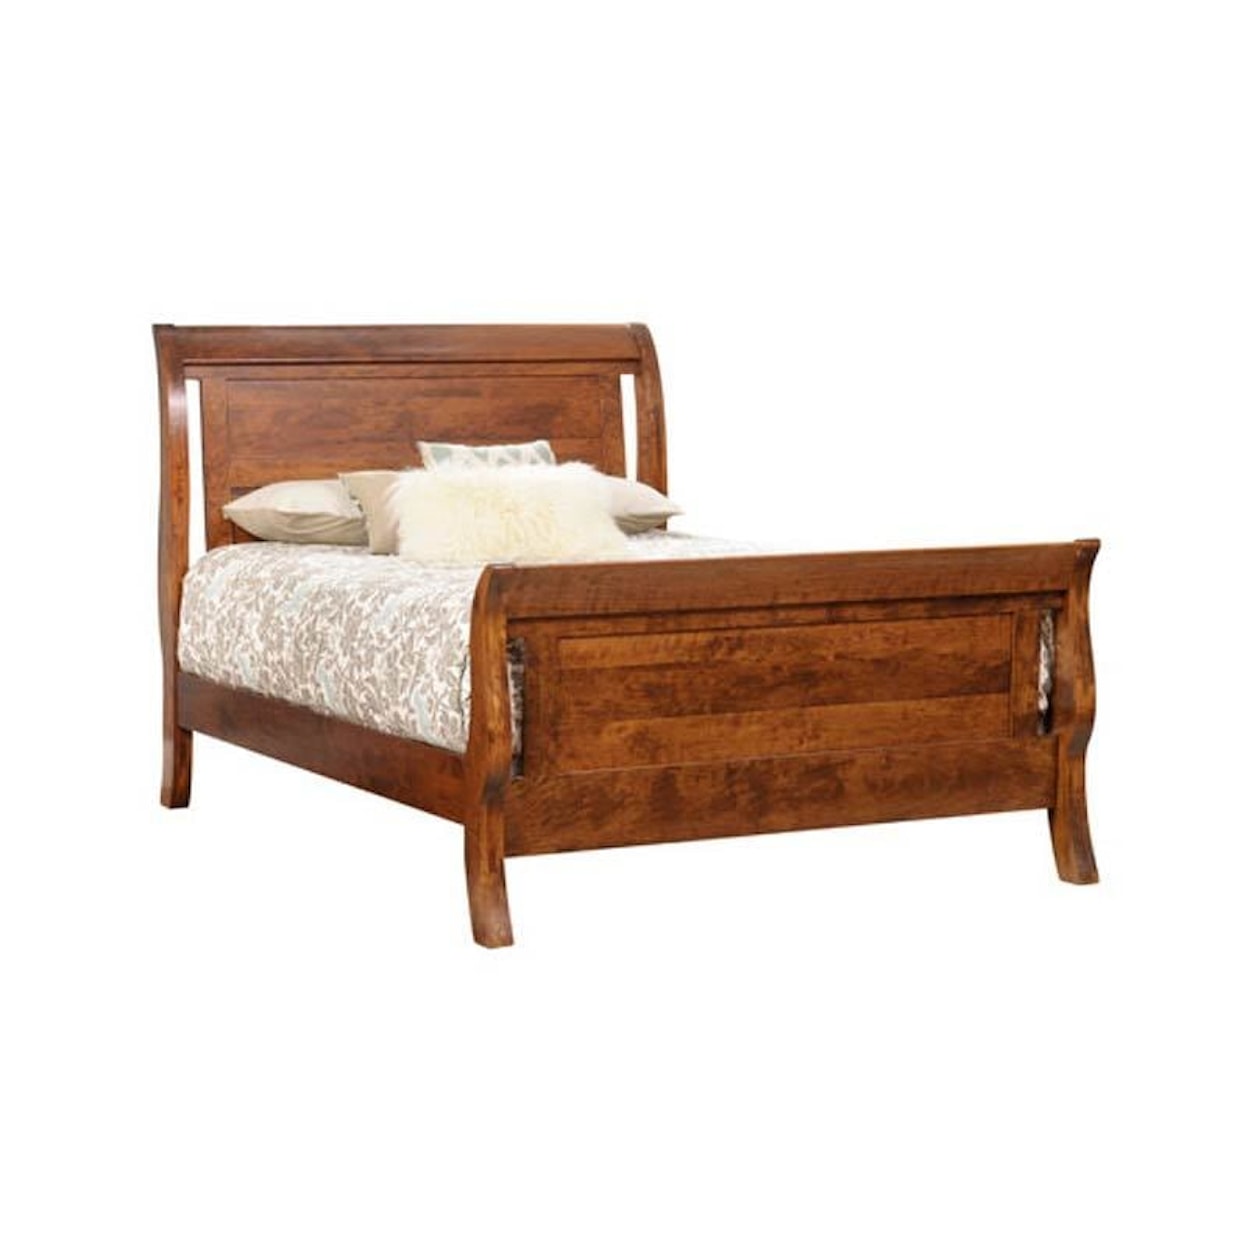 Millcraft Tucson King Sleigh Bed